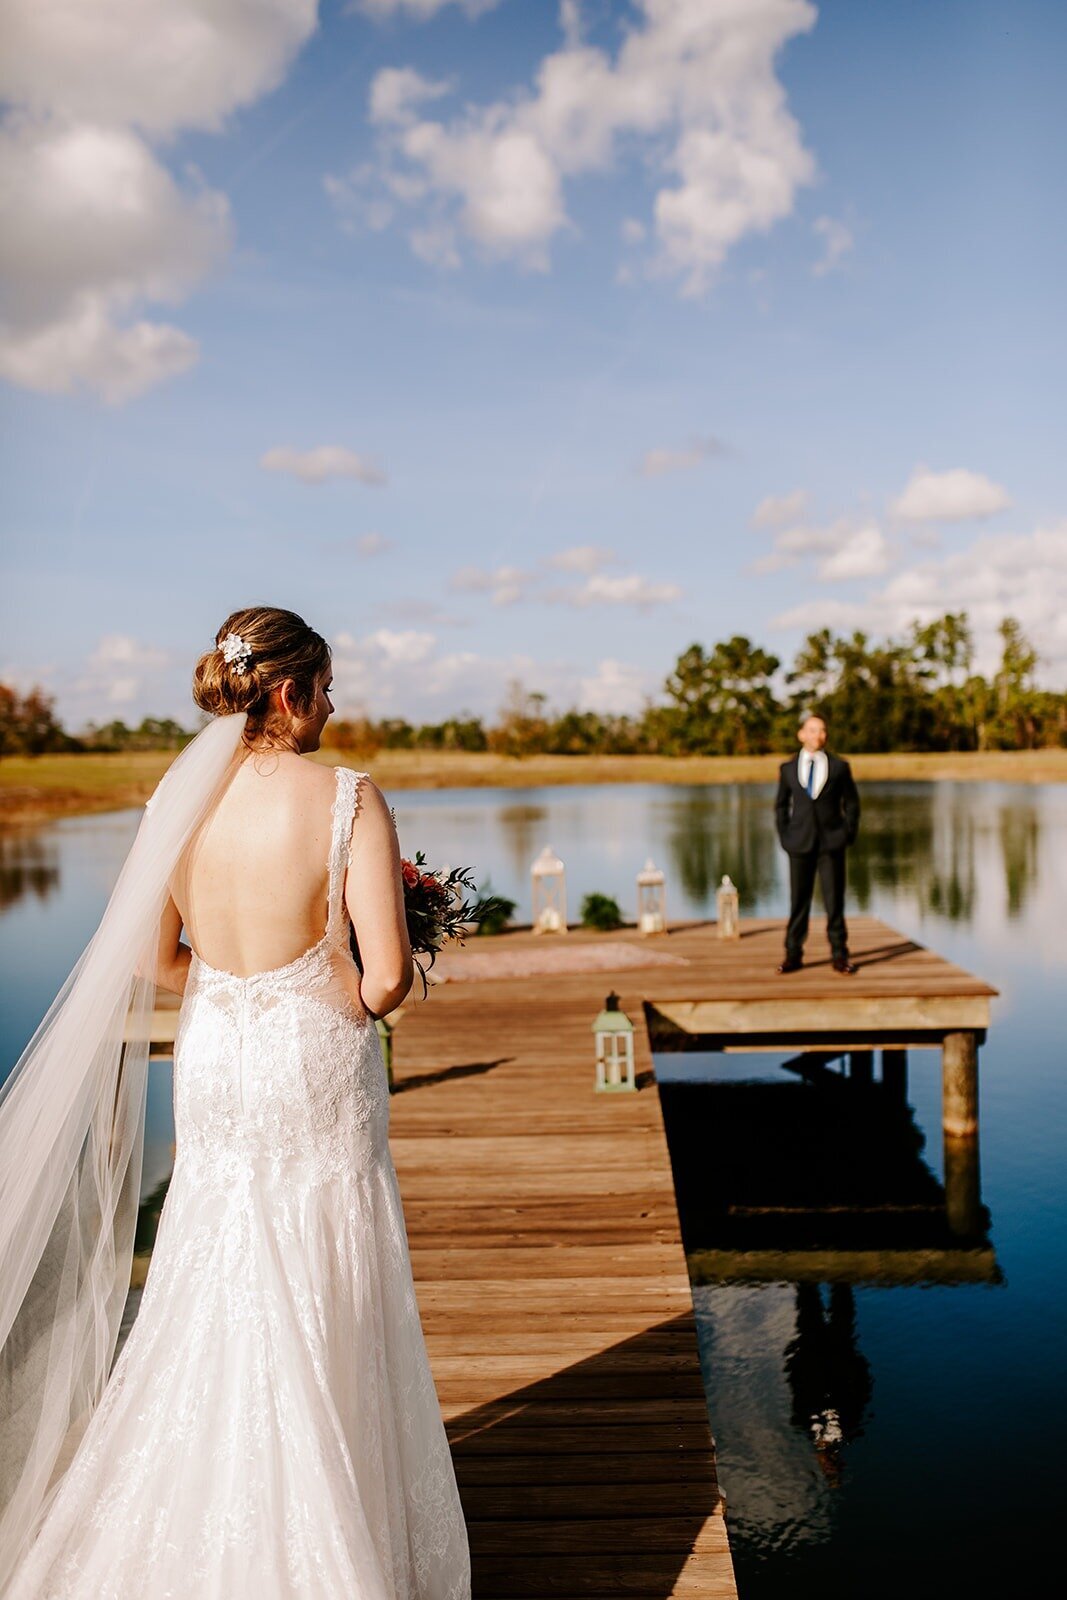 Legacy at Oak Meadows Wedding Venue - Pierson - Gainesville Florida - Weddings and Events61